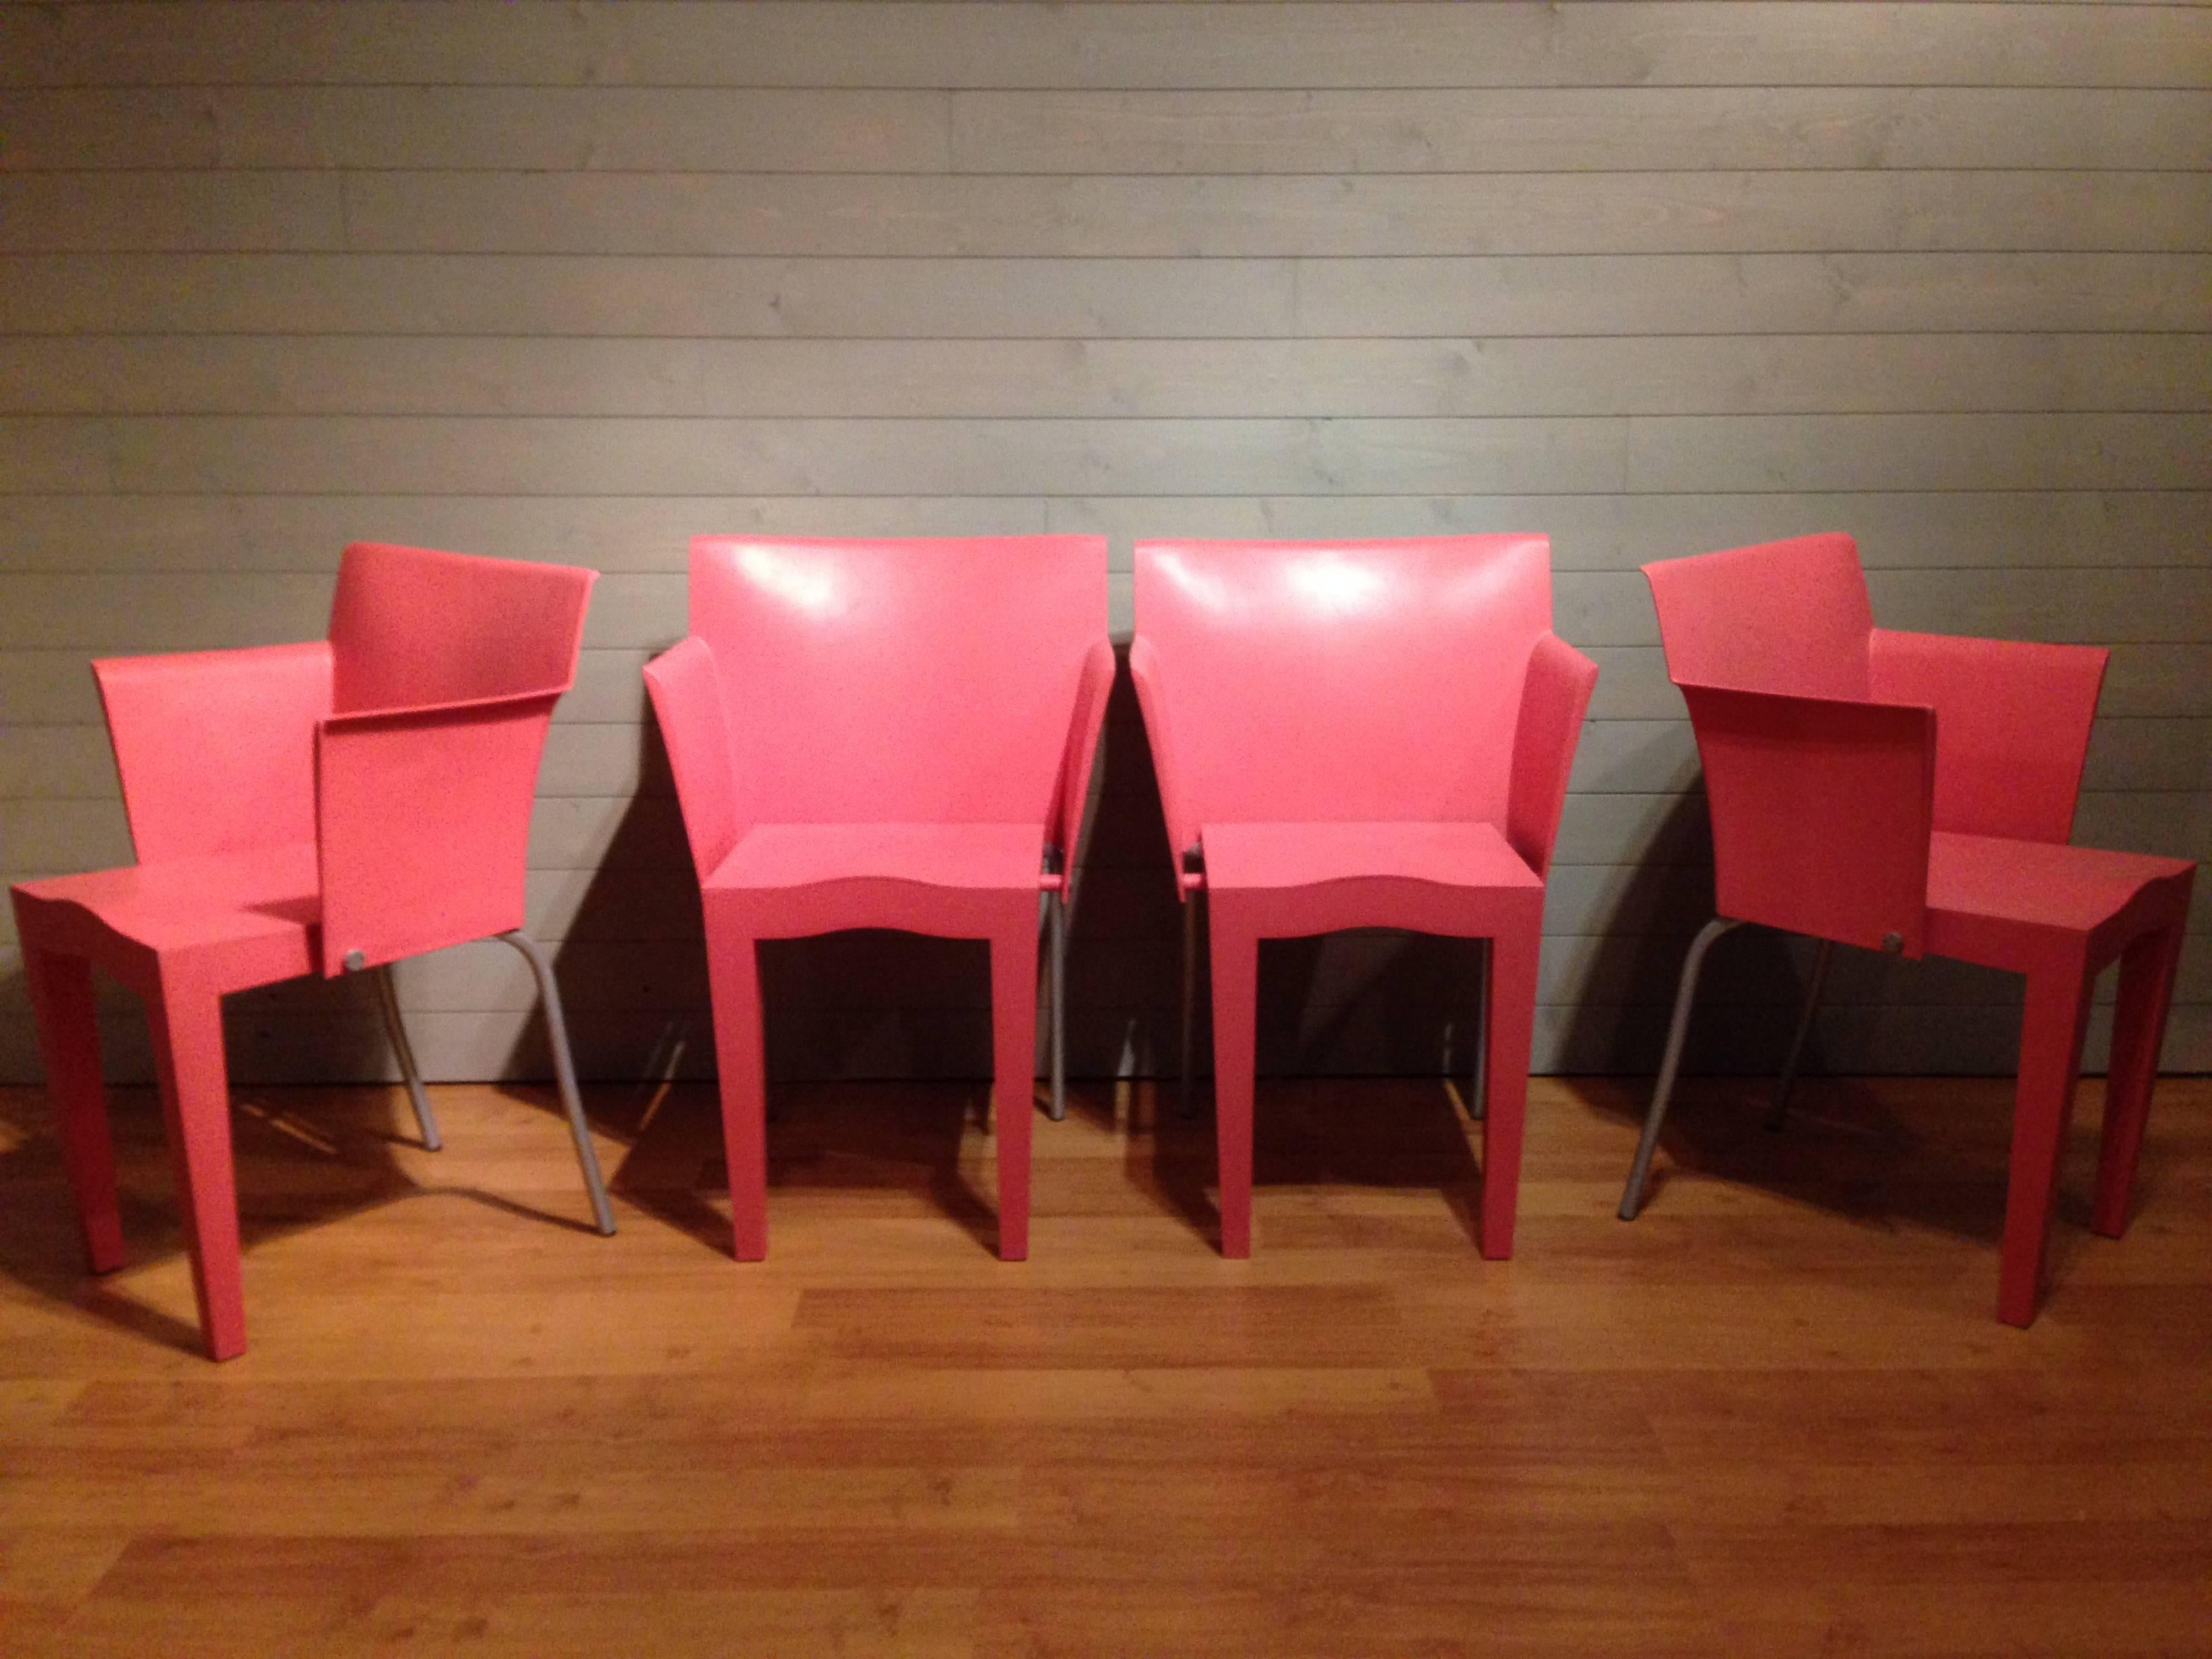 Rare series of Kartell armchairs model Super Glob by Philippe Starck, published in the early 1990s, for Kartell.
Its original design makes it a must have!
Structure in polypropylene and rear base in sanded aluminum.
Color Pink Pop!
Design,